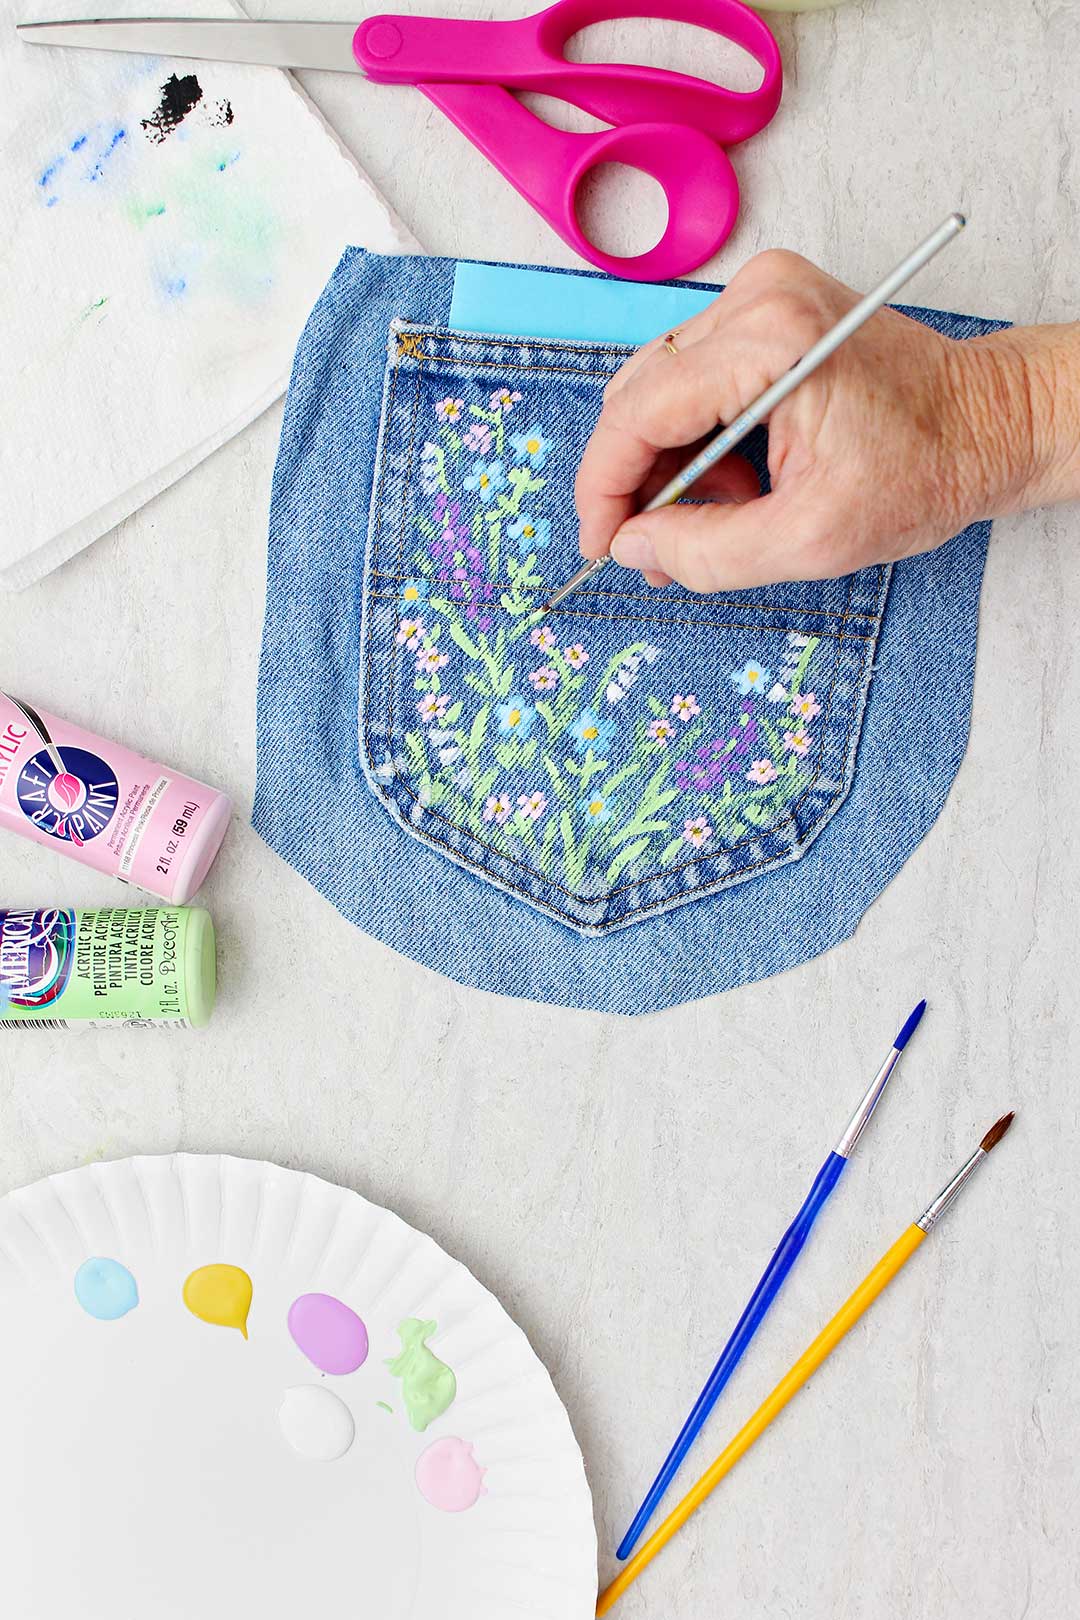 Custom Denim Jacket, Hand Painted Jean Jacket, Acrylic Painting, Flower  Art, Up-cycled Clothing, Customised Gift for Her, Cute Womens Jacket - Etsy